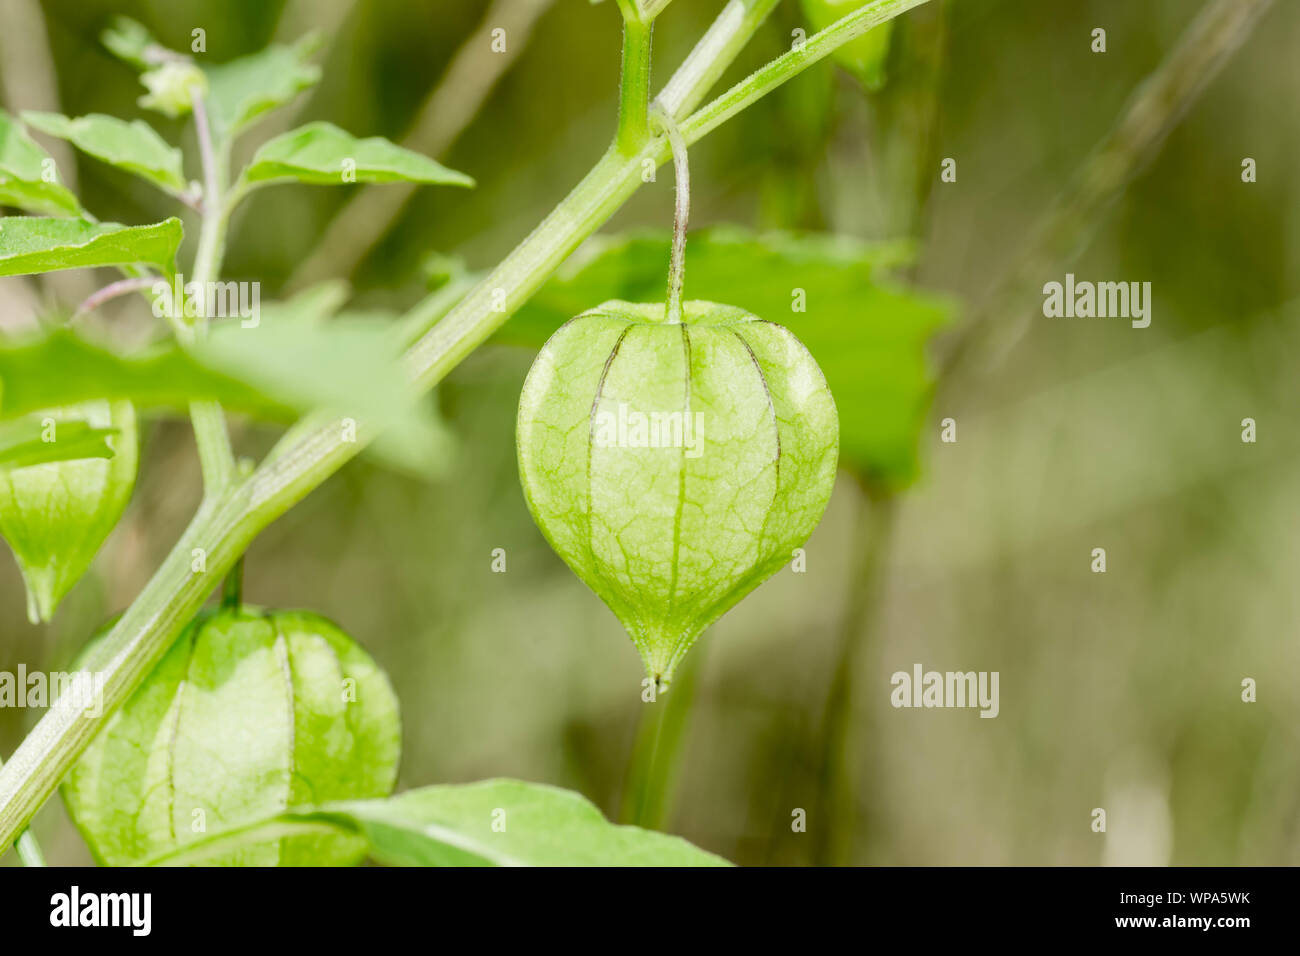 Fresh, unripe, green cape gooseberry still attached to its tree. Hanging cape gooseberries are also known as tino-tino in the Philippines. Stock Photo